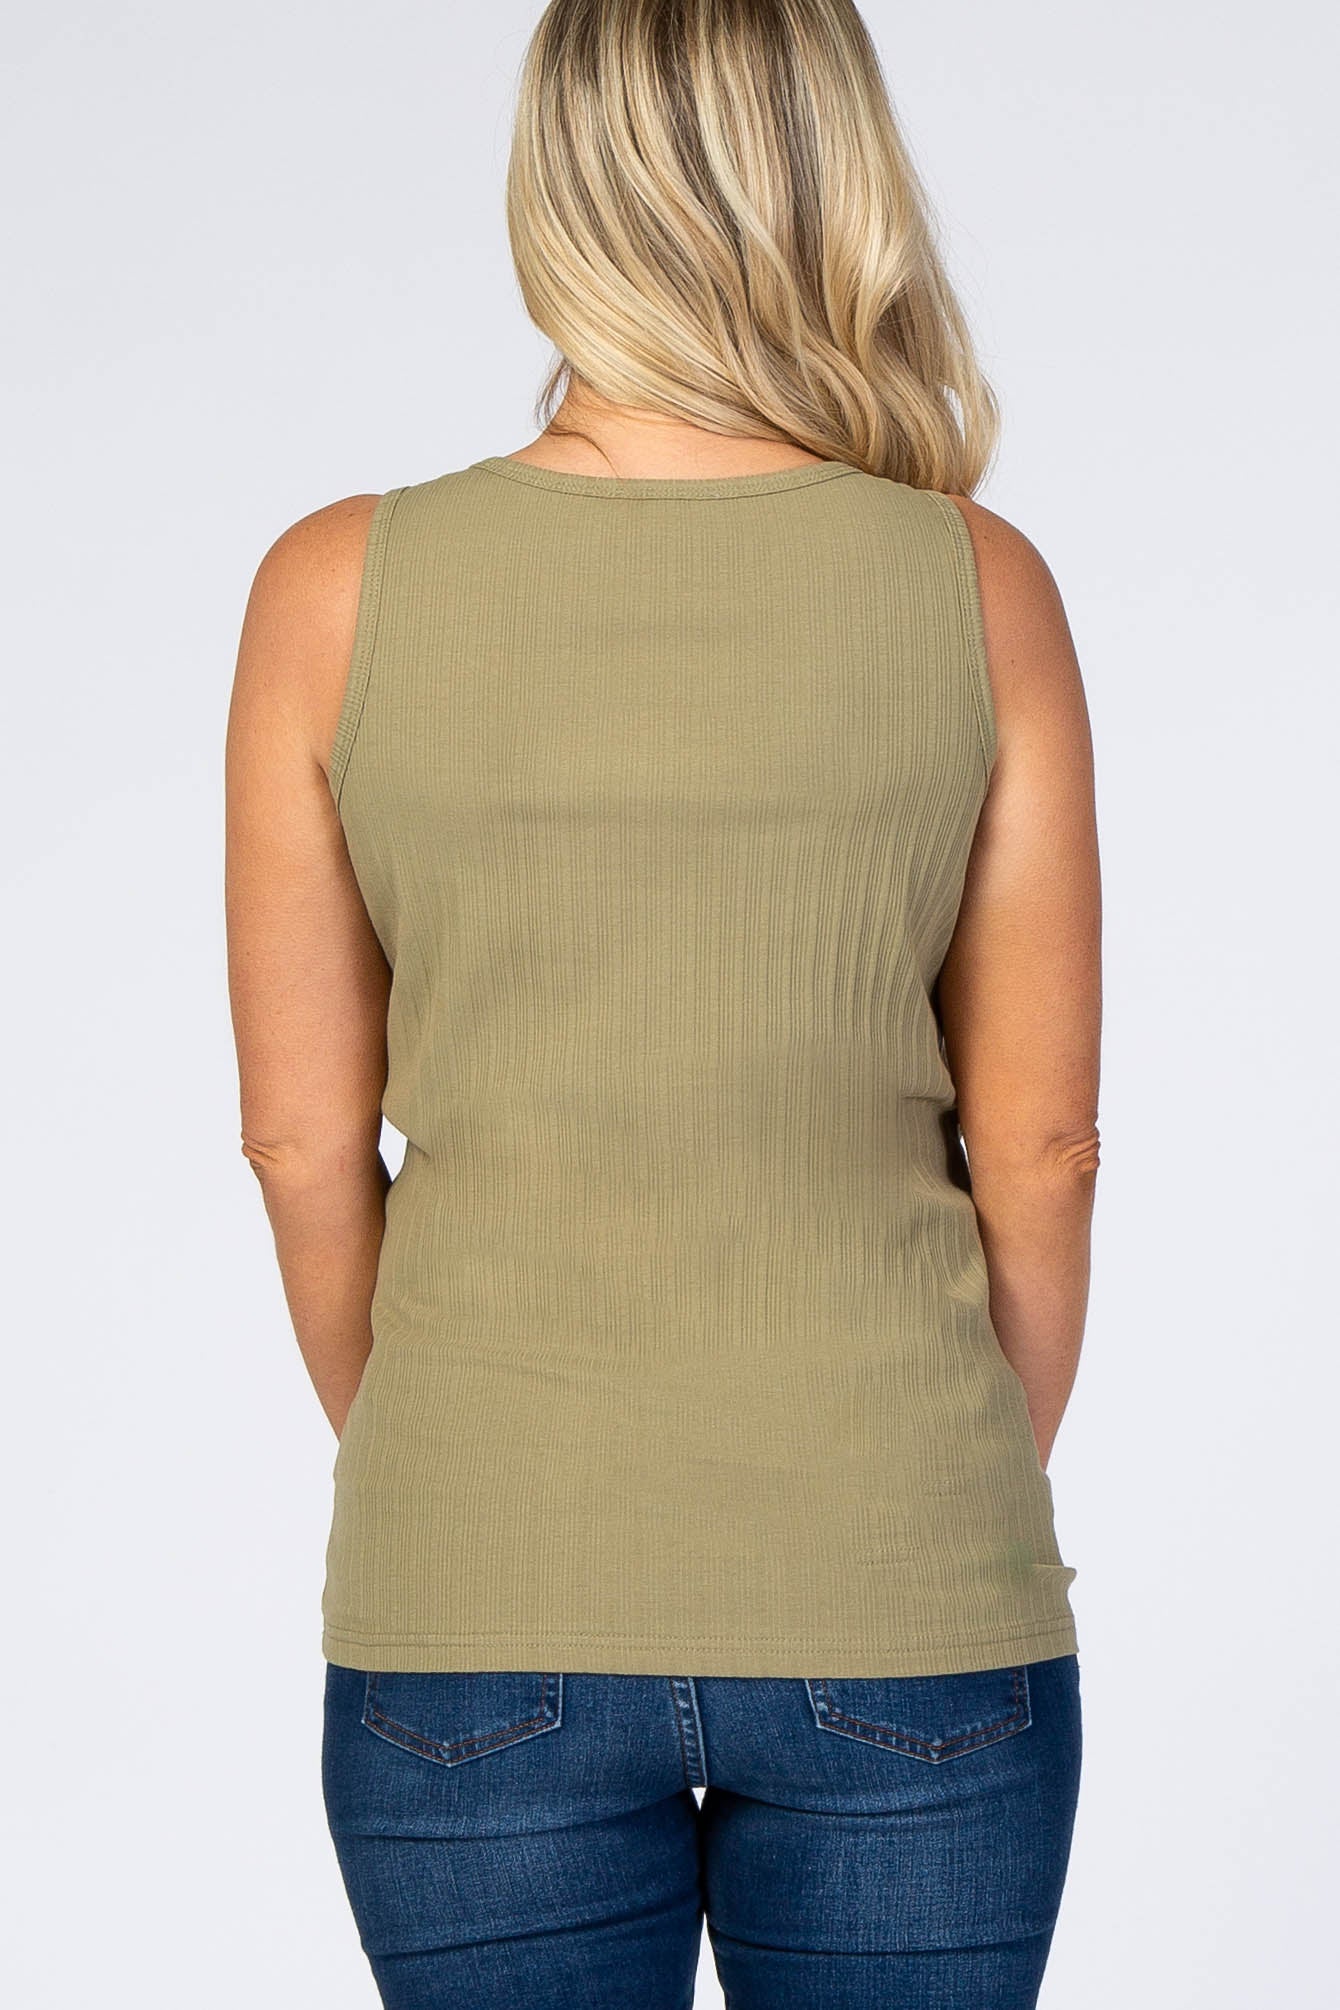 Light Olive Ribbed Button Front Maternity Tank Top